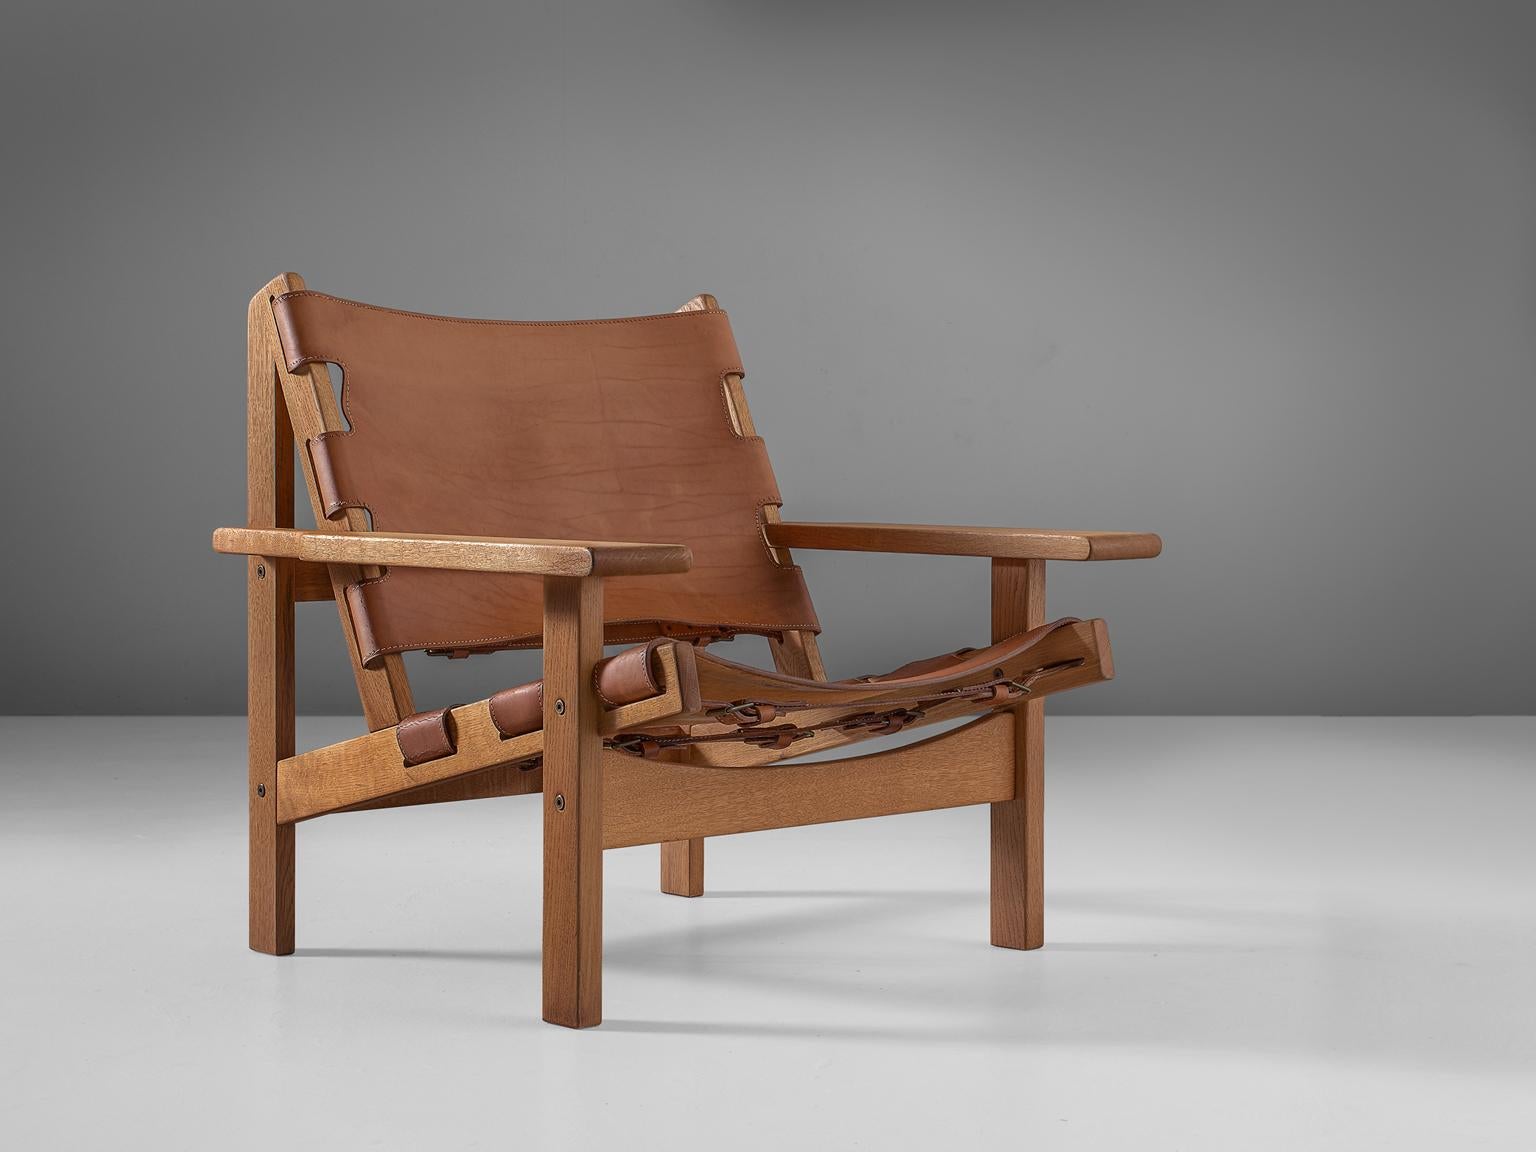 Erling Jessen, lounge chair model 168, oak and leather, Denmark 1960s. 

Stunning 'Jagt Stolen' by Erling Jessen, who was inspired by Børge Mogensens Spanish Chair. The frame consists of solid oak and makes a sturdy appearance. The oblique place